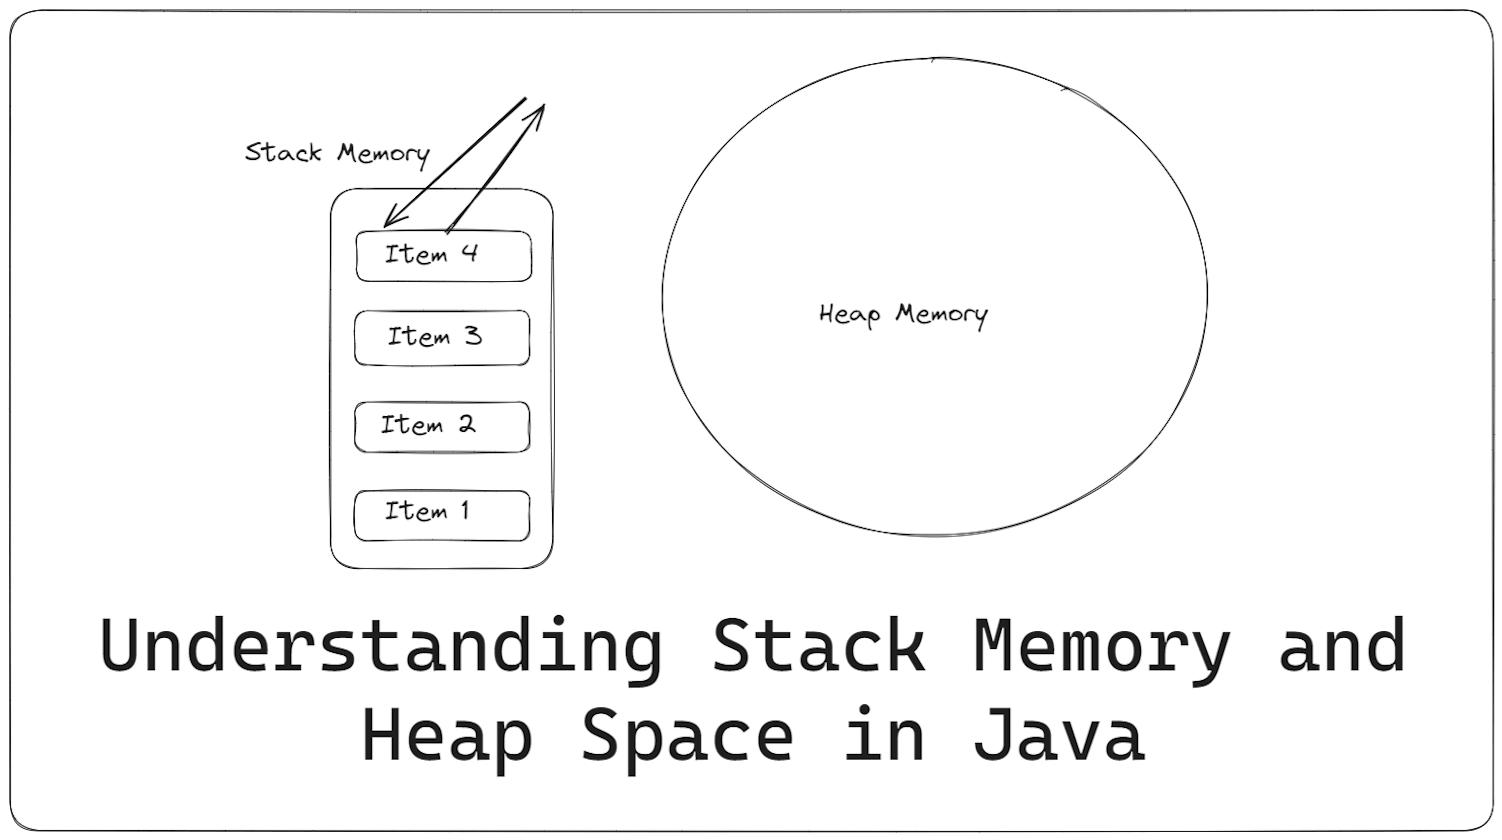 Understanding Stack Memory and Heap Space in Java